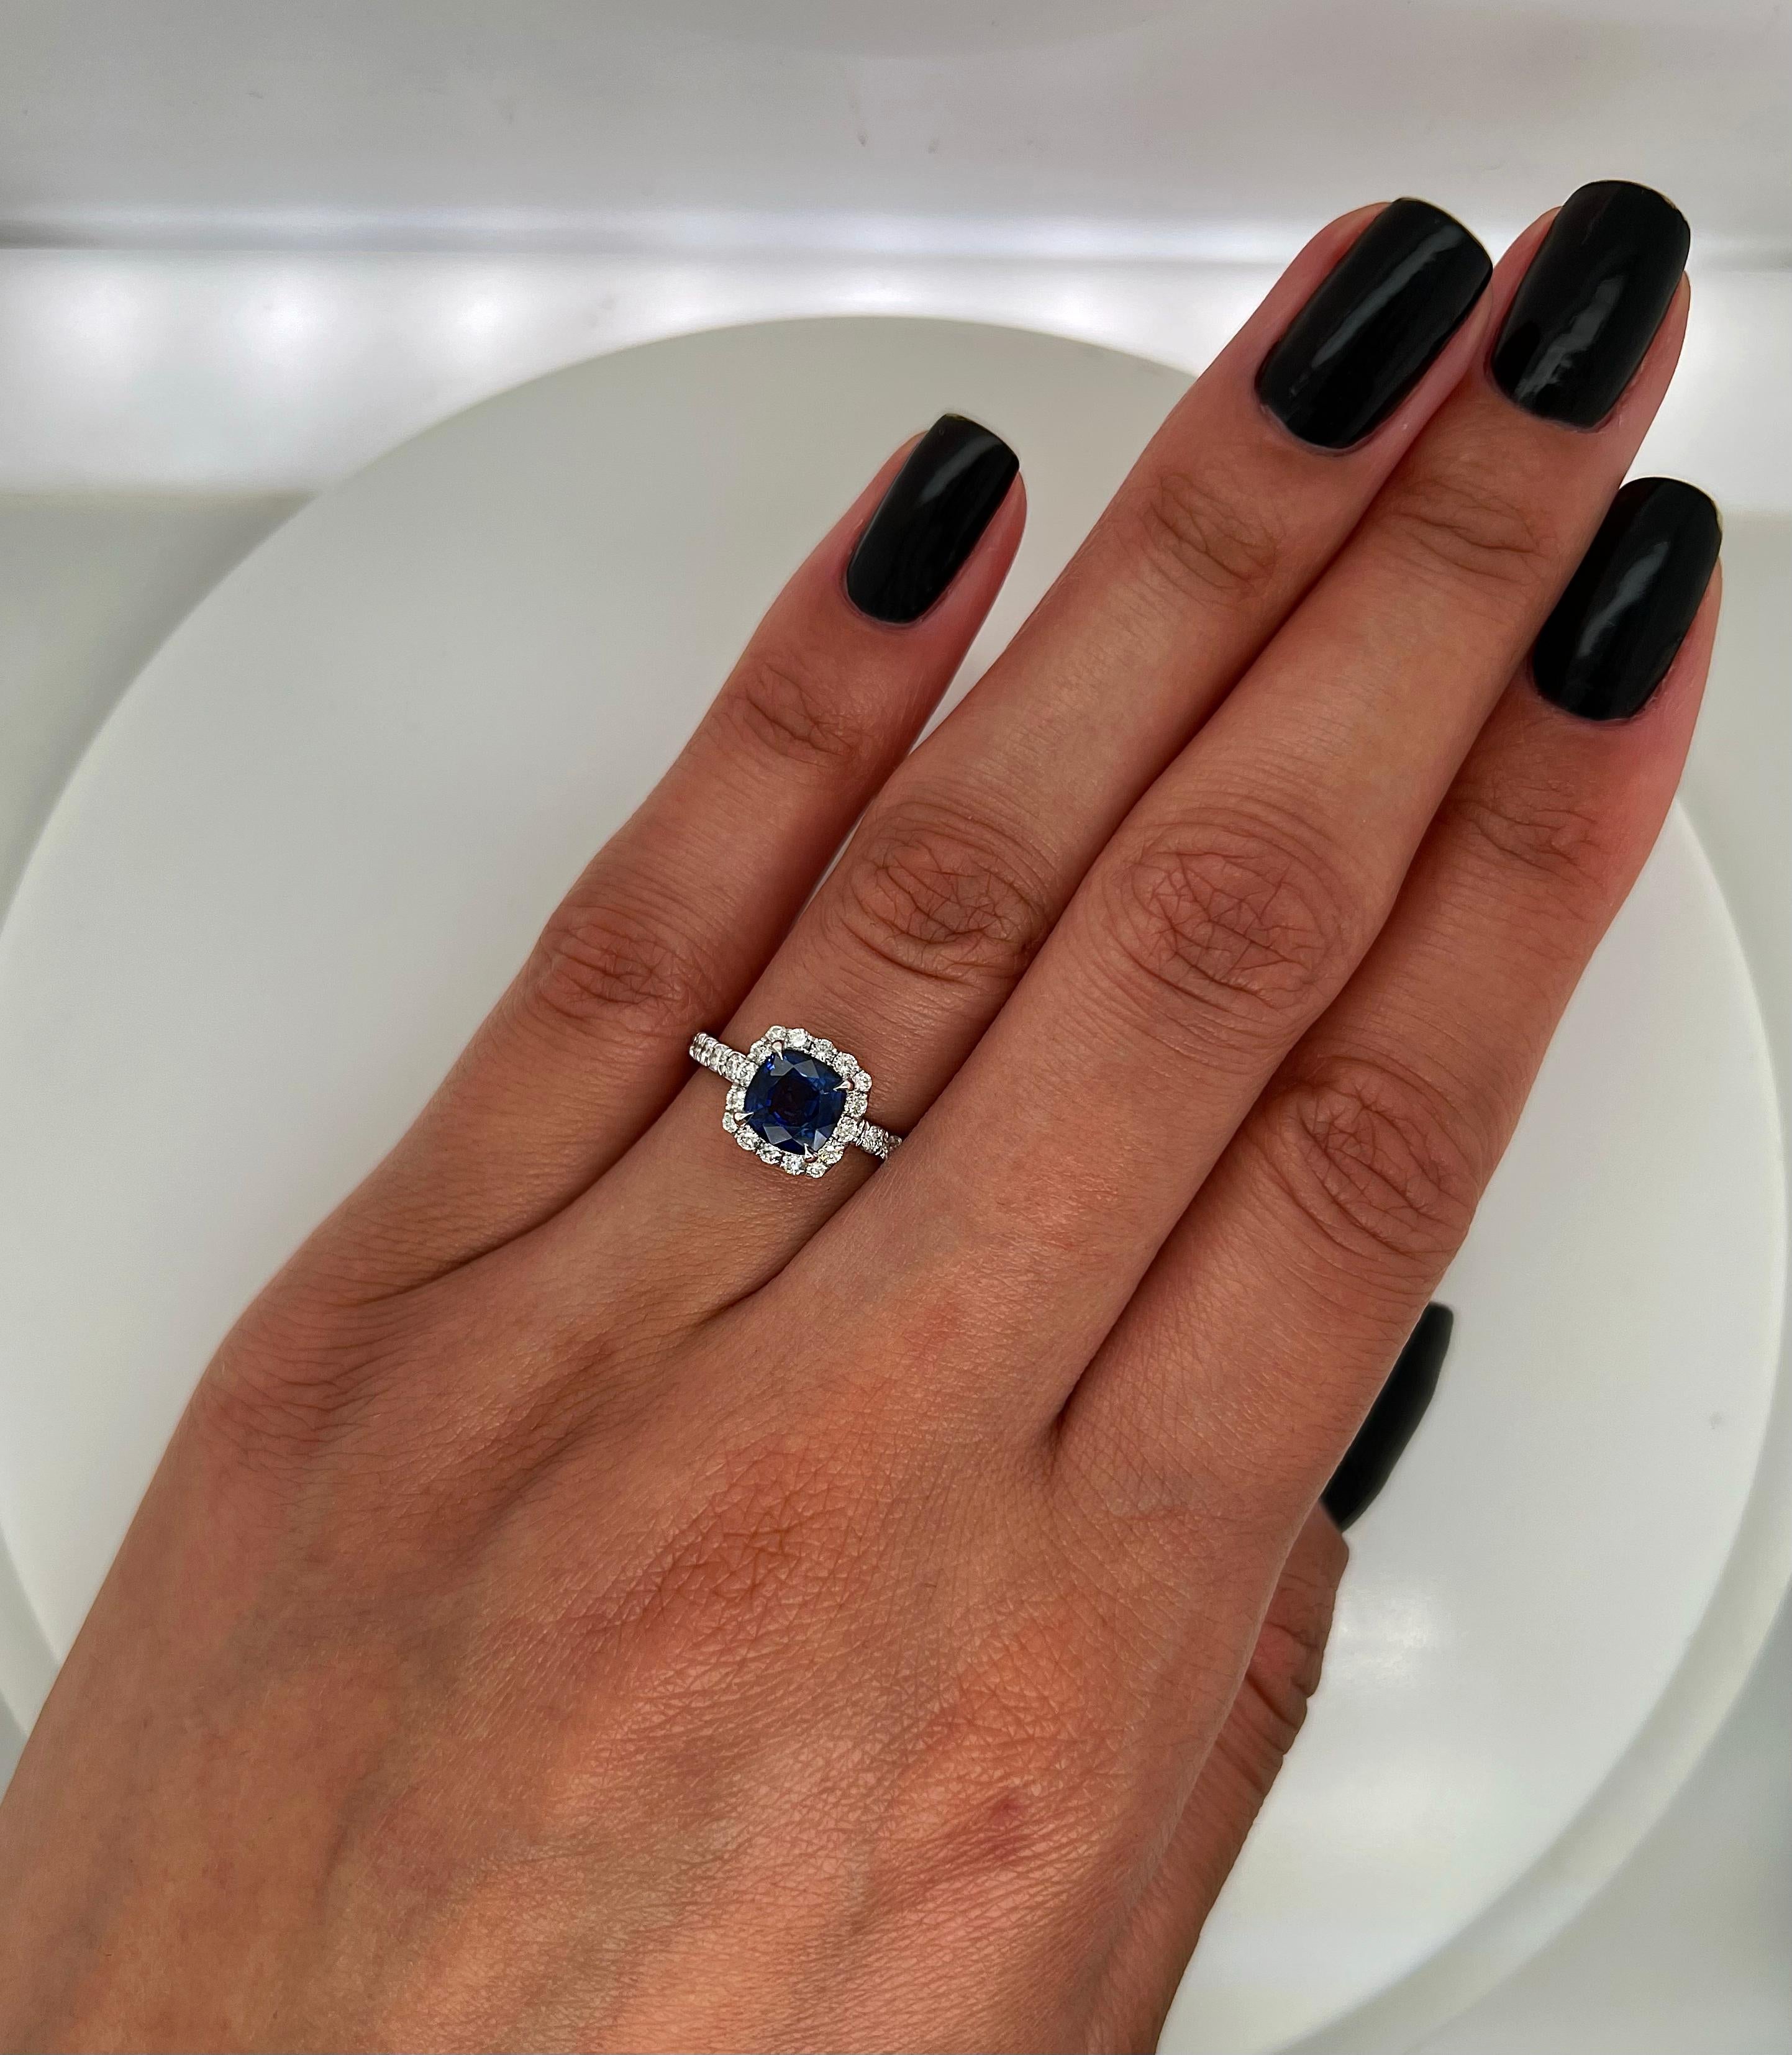 black sapphire engagement ring meaning